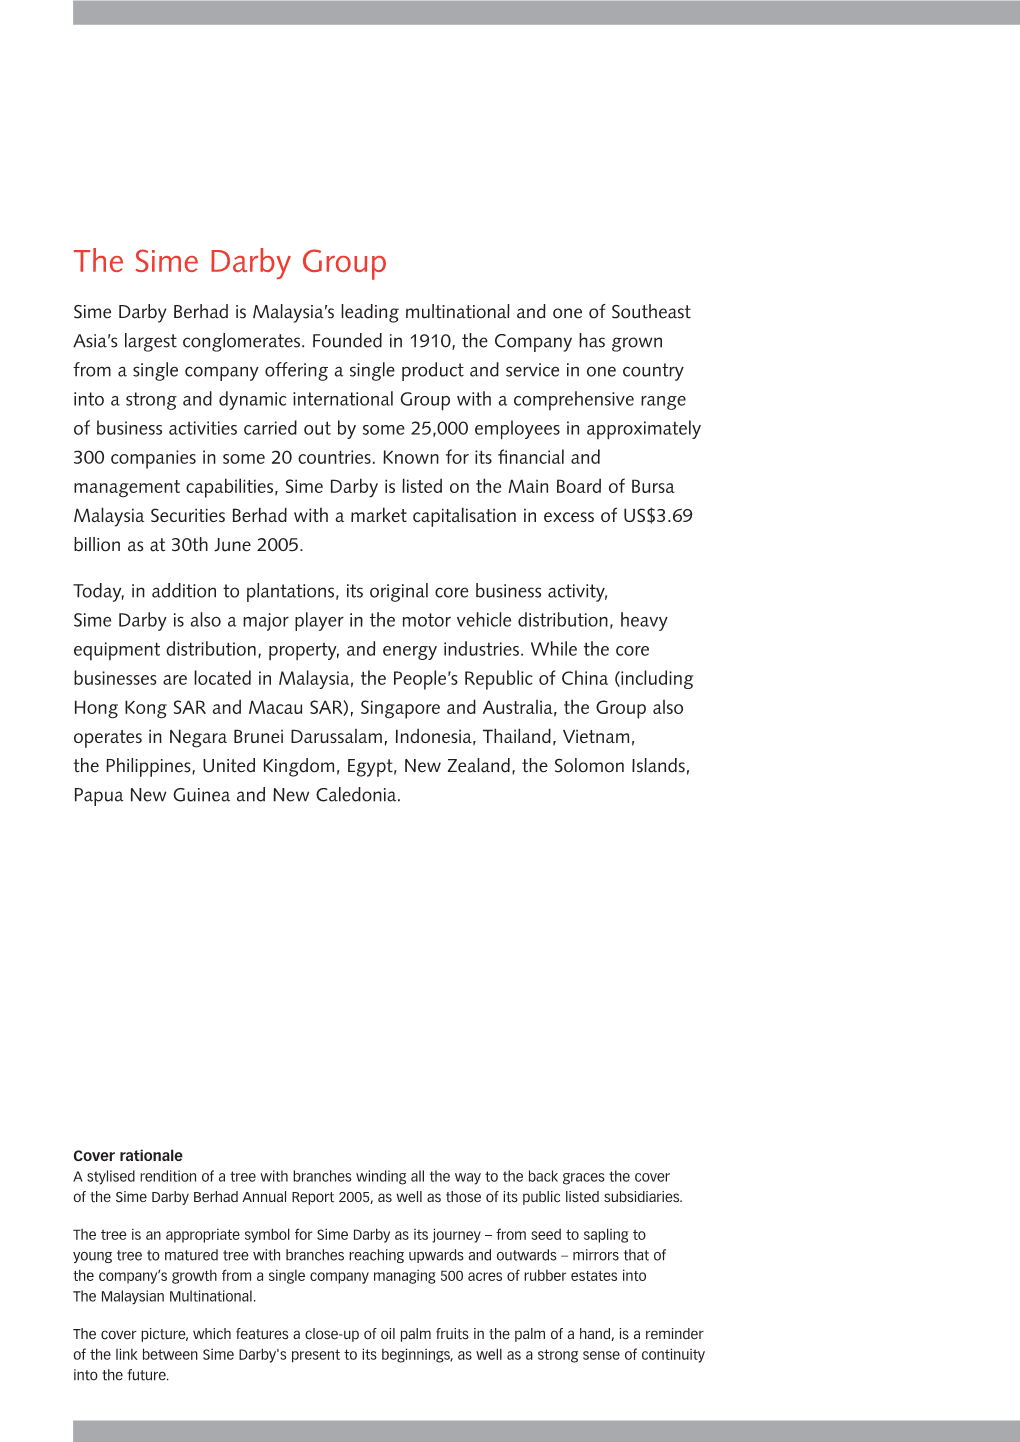 The Sime Darby Group